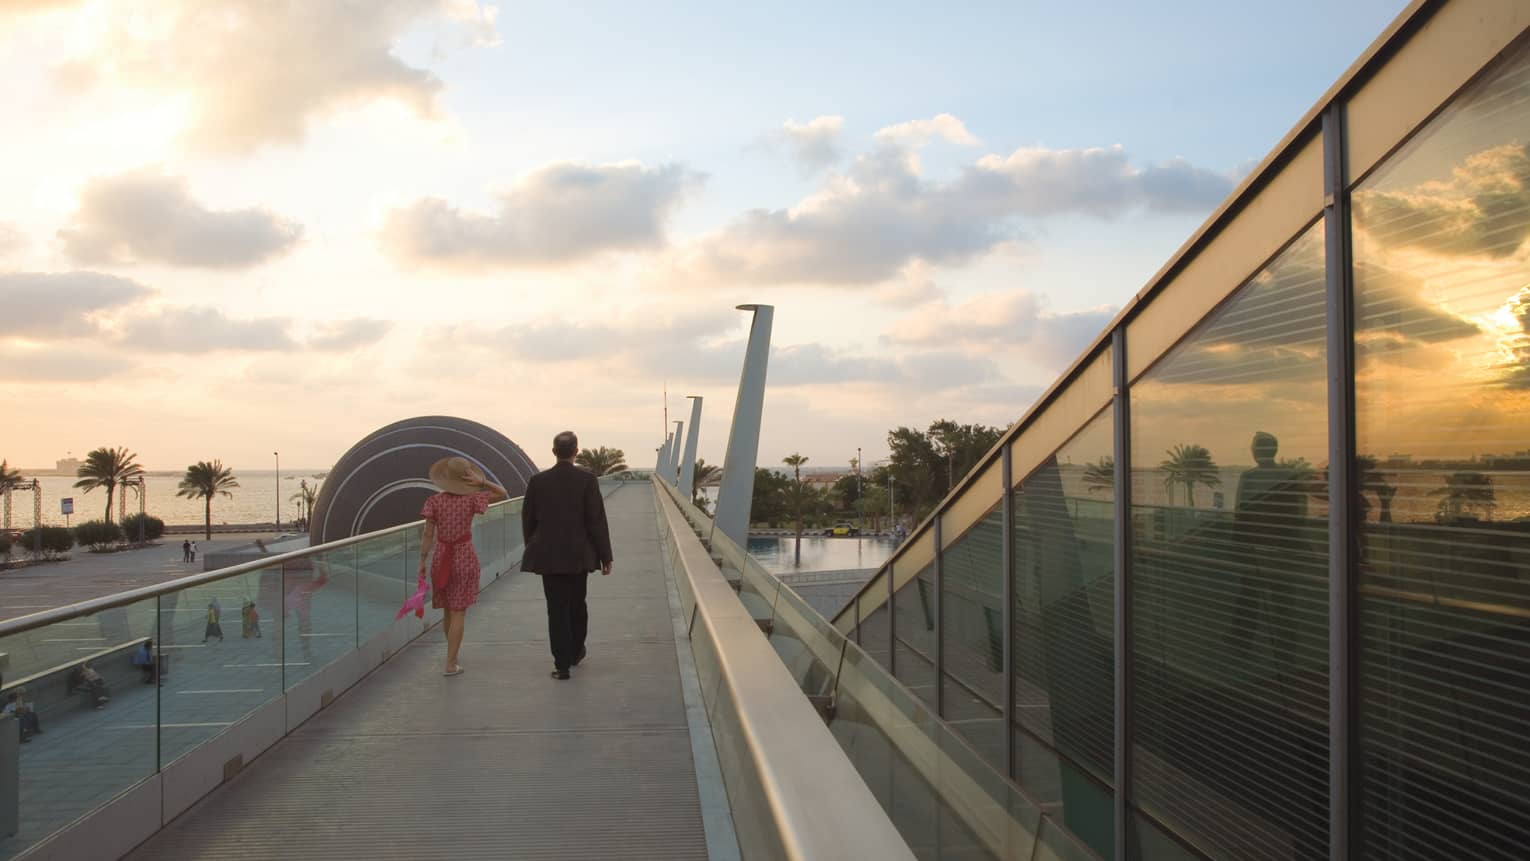 Back view of man in suit and woman in dress walking along raised Bibliotheca Alexandrina walkway at sunset